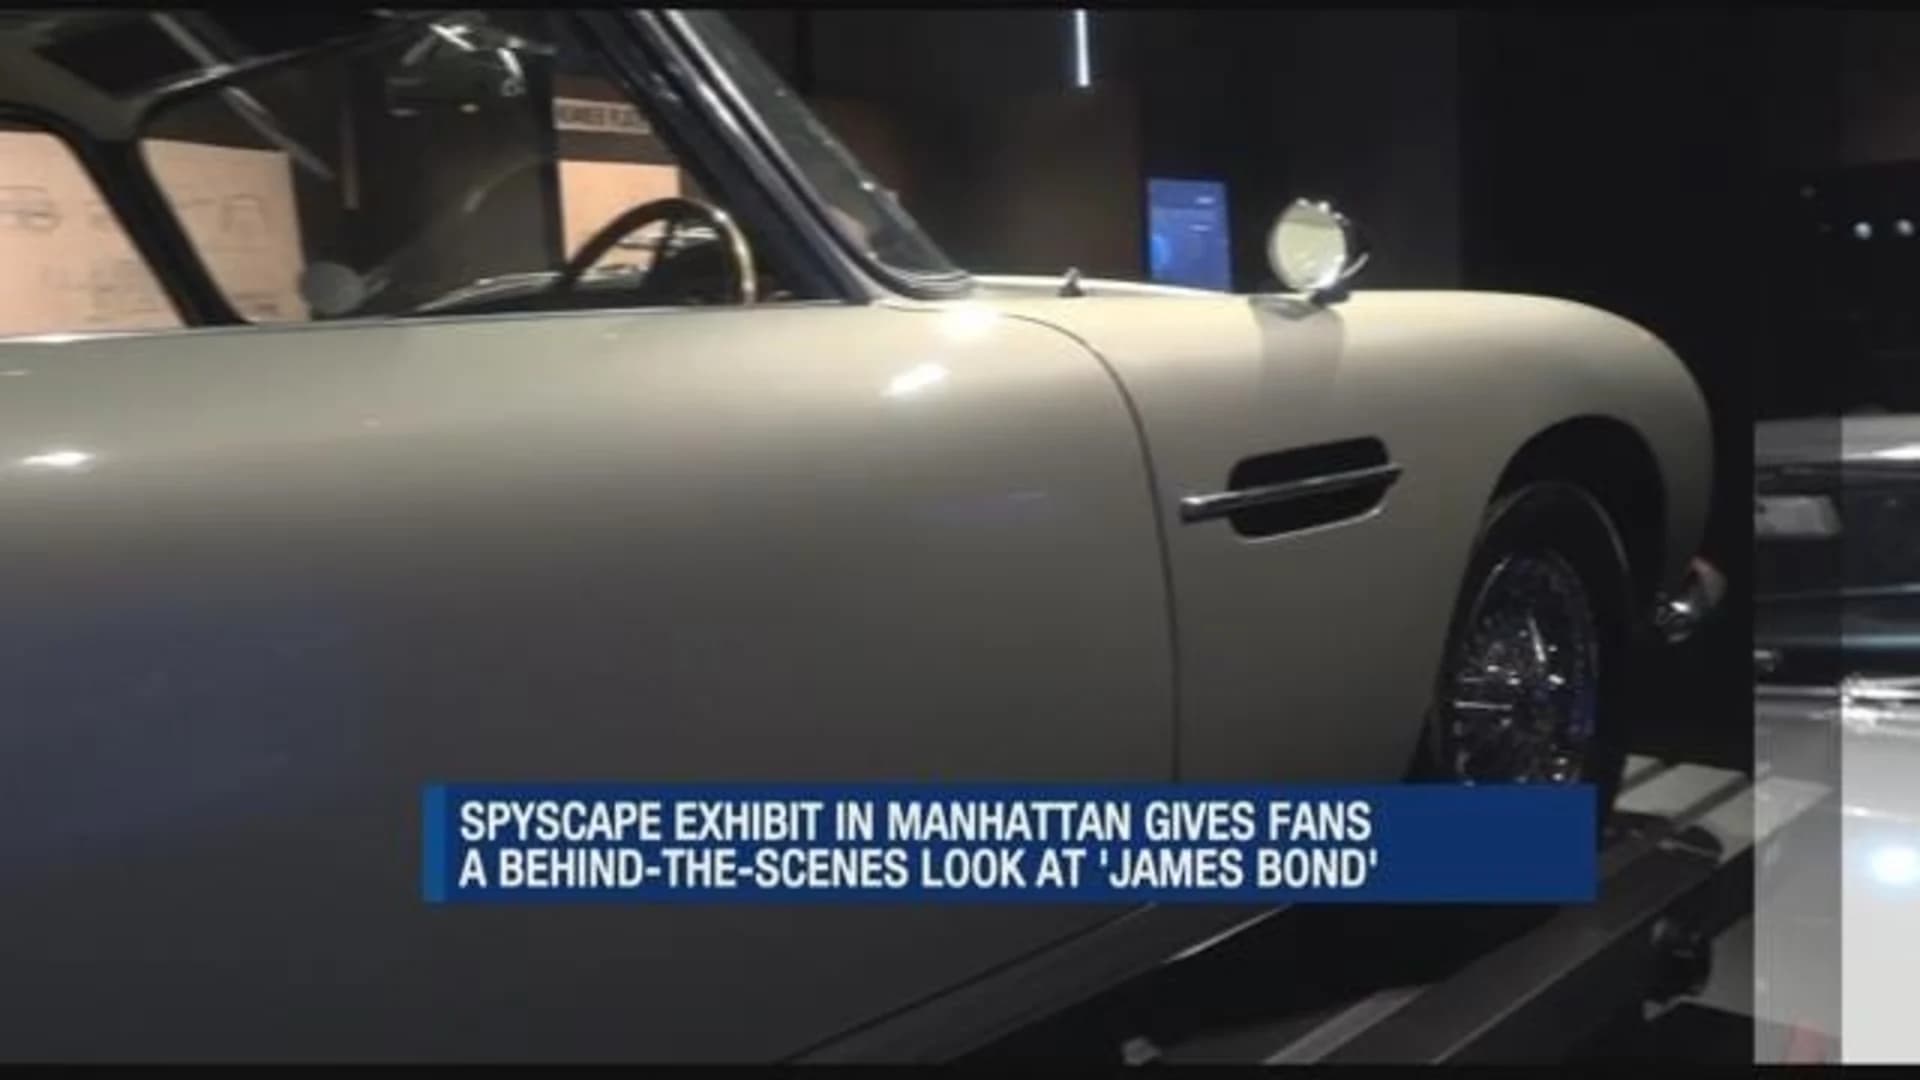 Exhibit gives behind-the-scenes look at James Bond movies